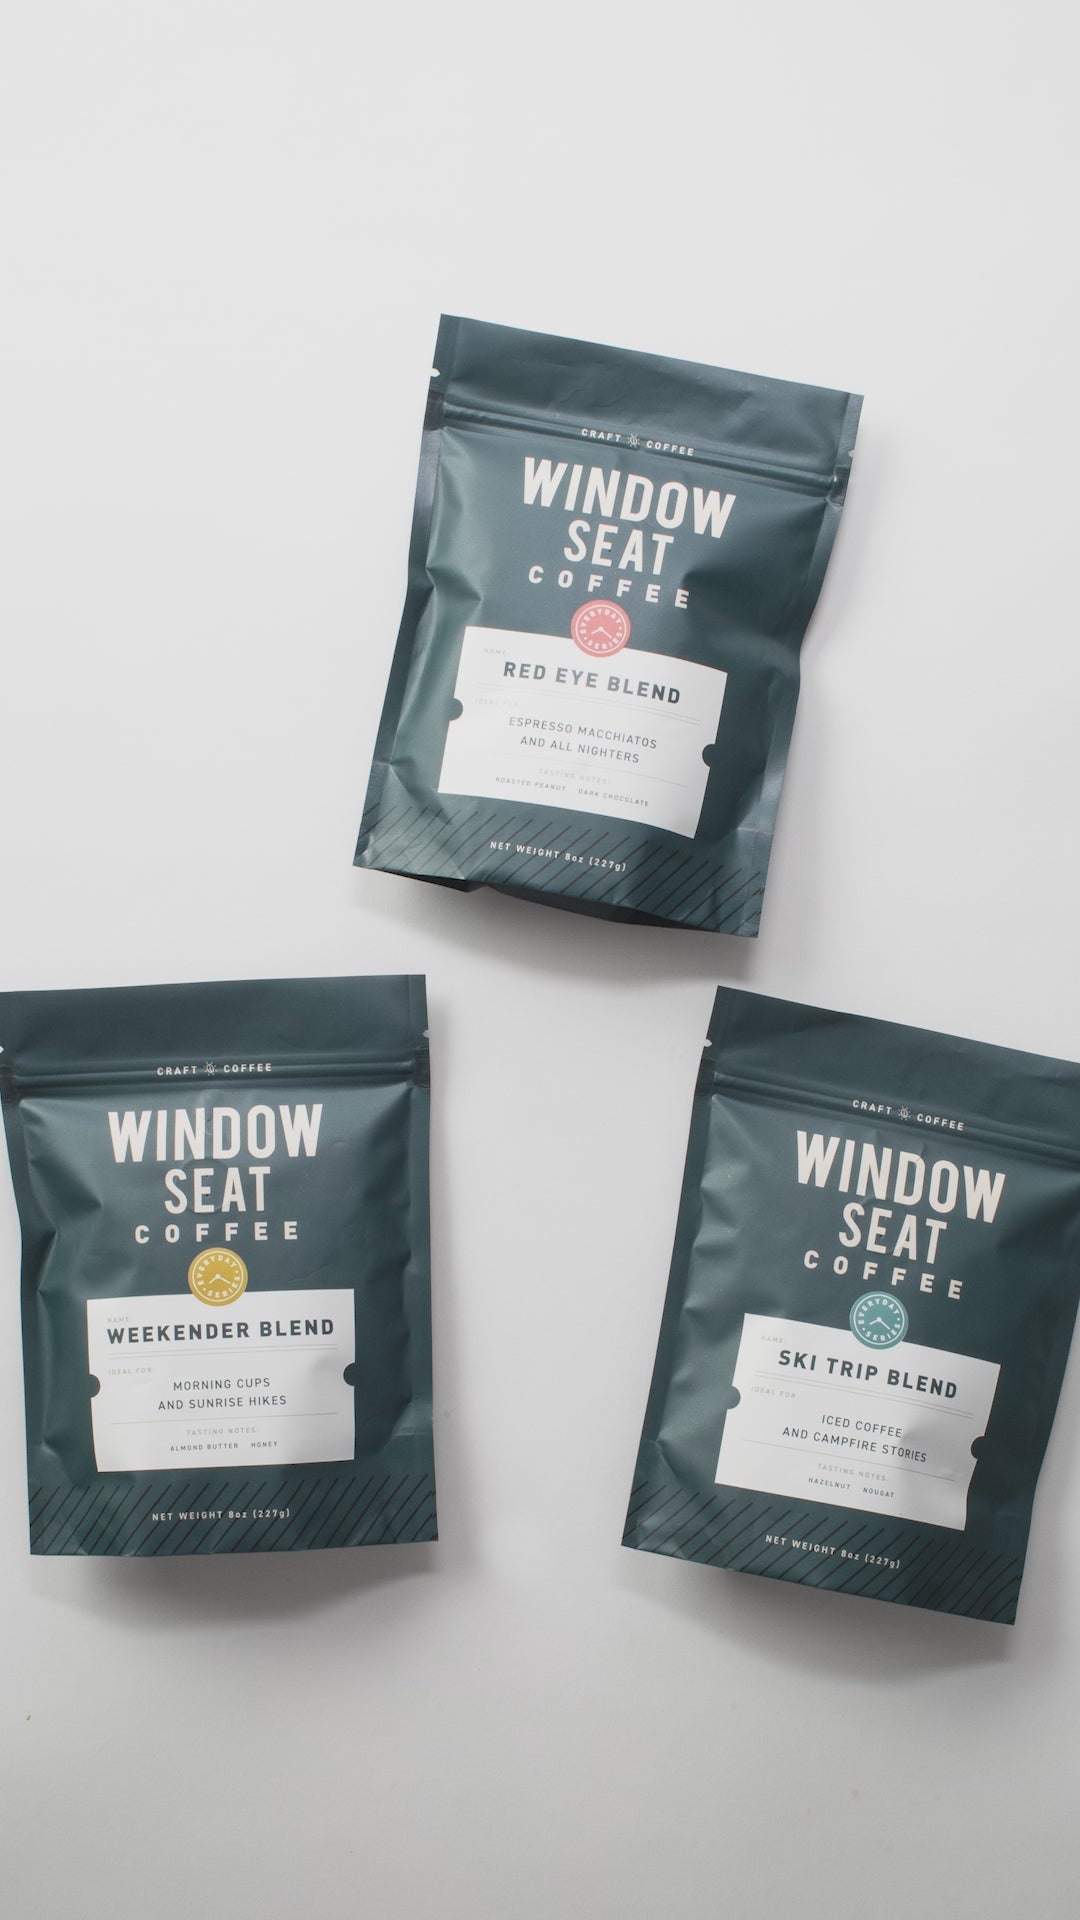 GIF of three 8oz bags of whole bean roasted coffee from Window Seat Coffee, including weekender blend, red eye blend, and ski trip blend